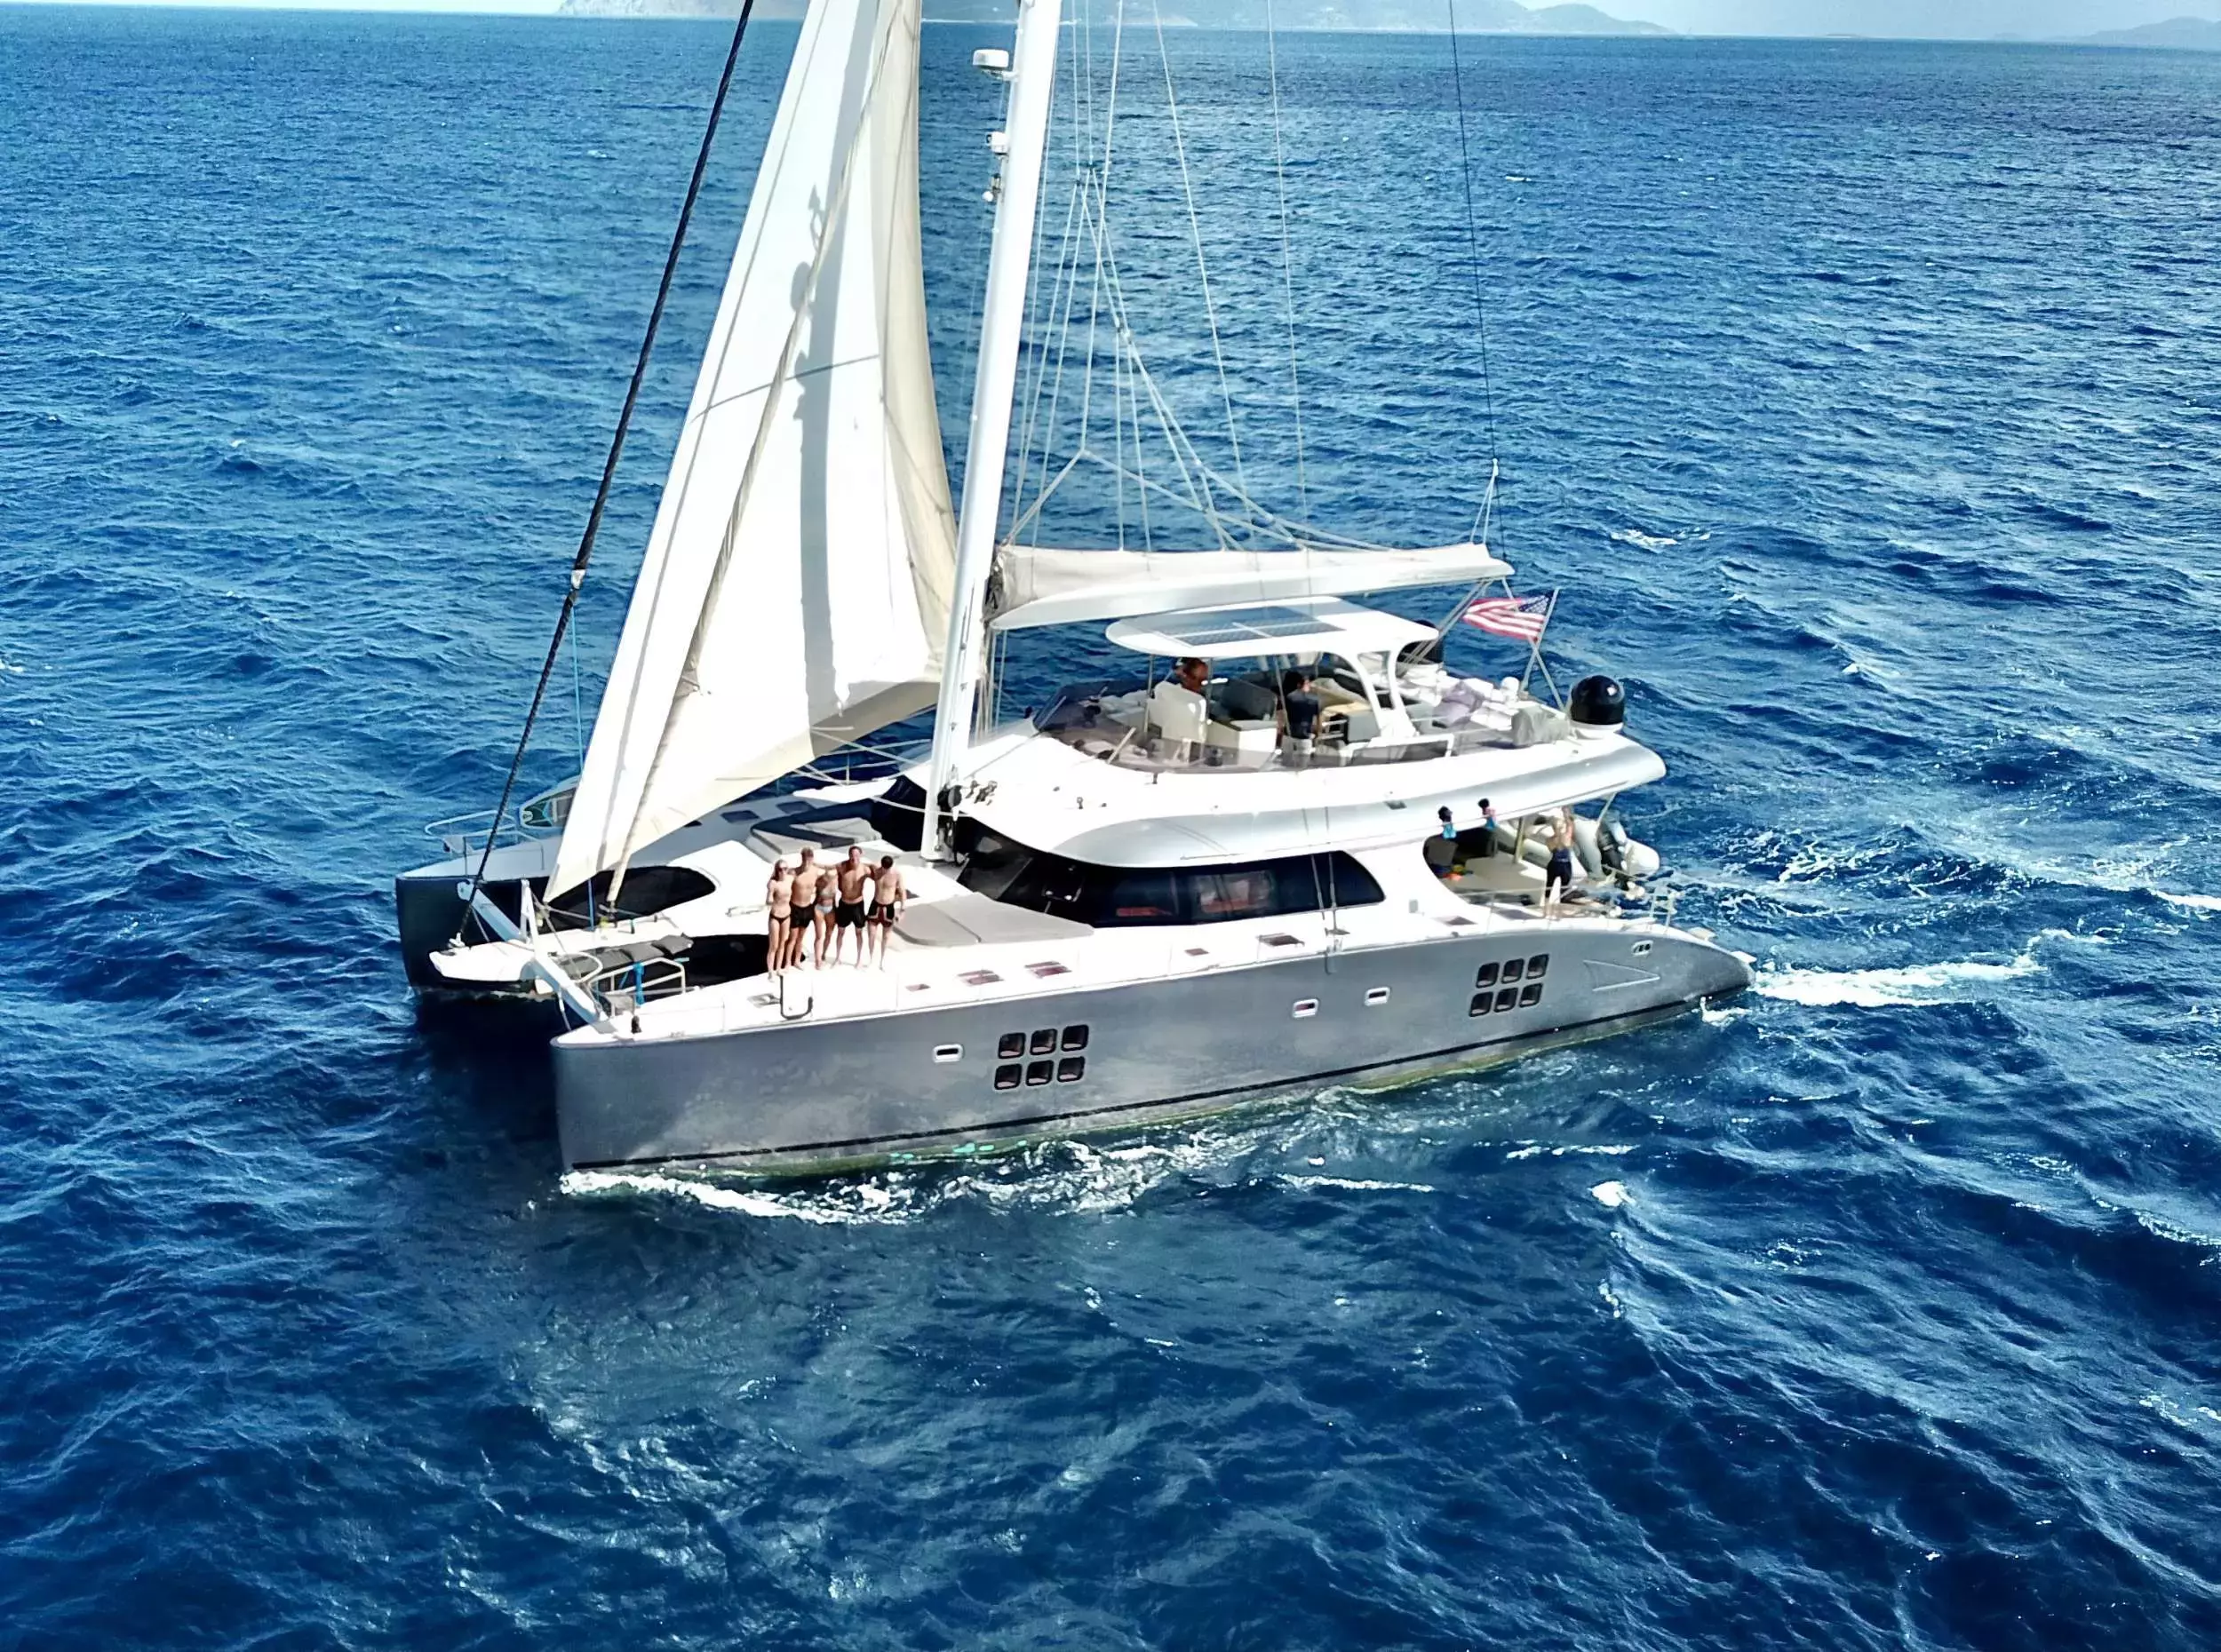 Excess by Sunreef Yachts - Special Offer for a private Luxury Catamaran Charter in St Thomas with a crew